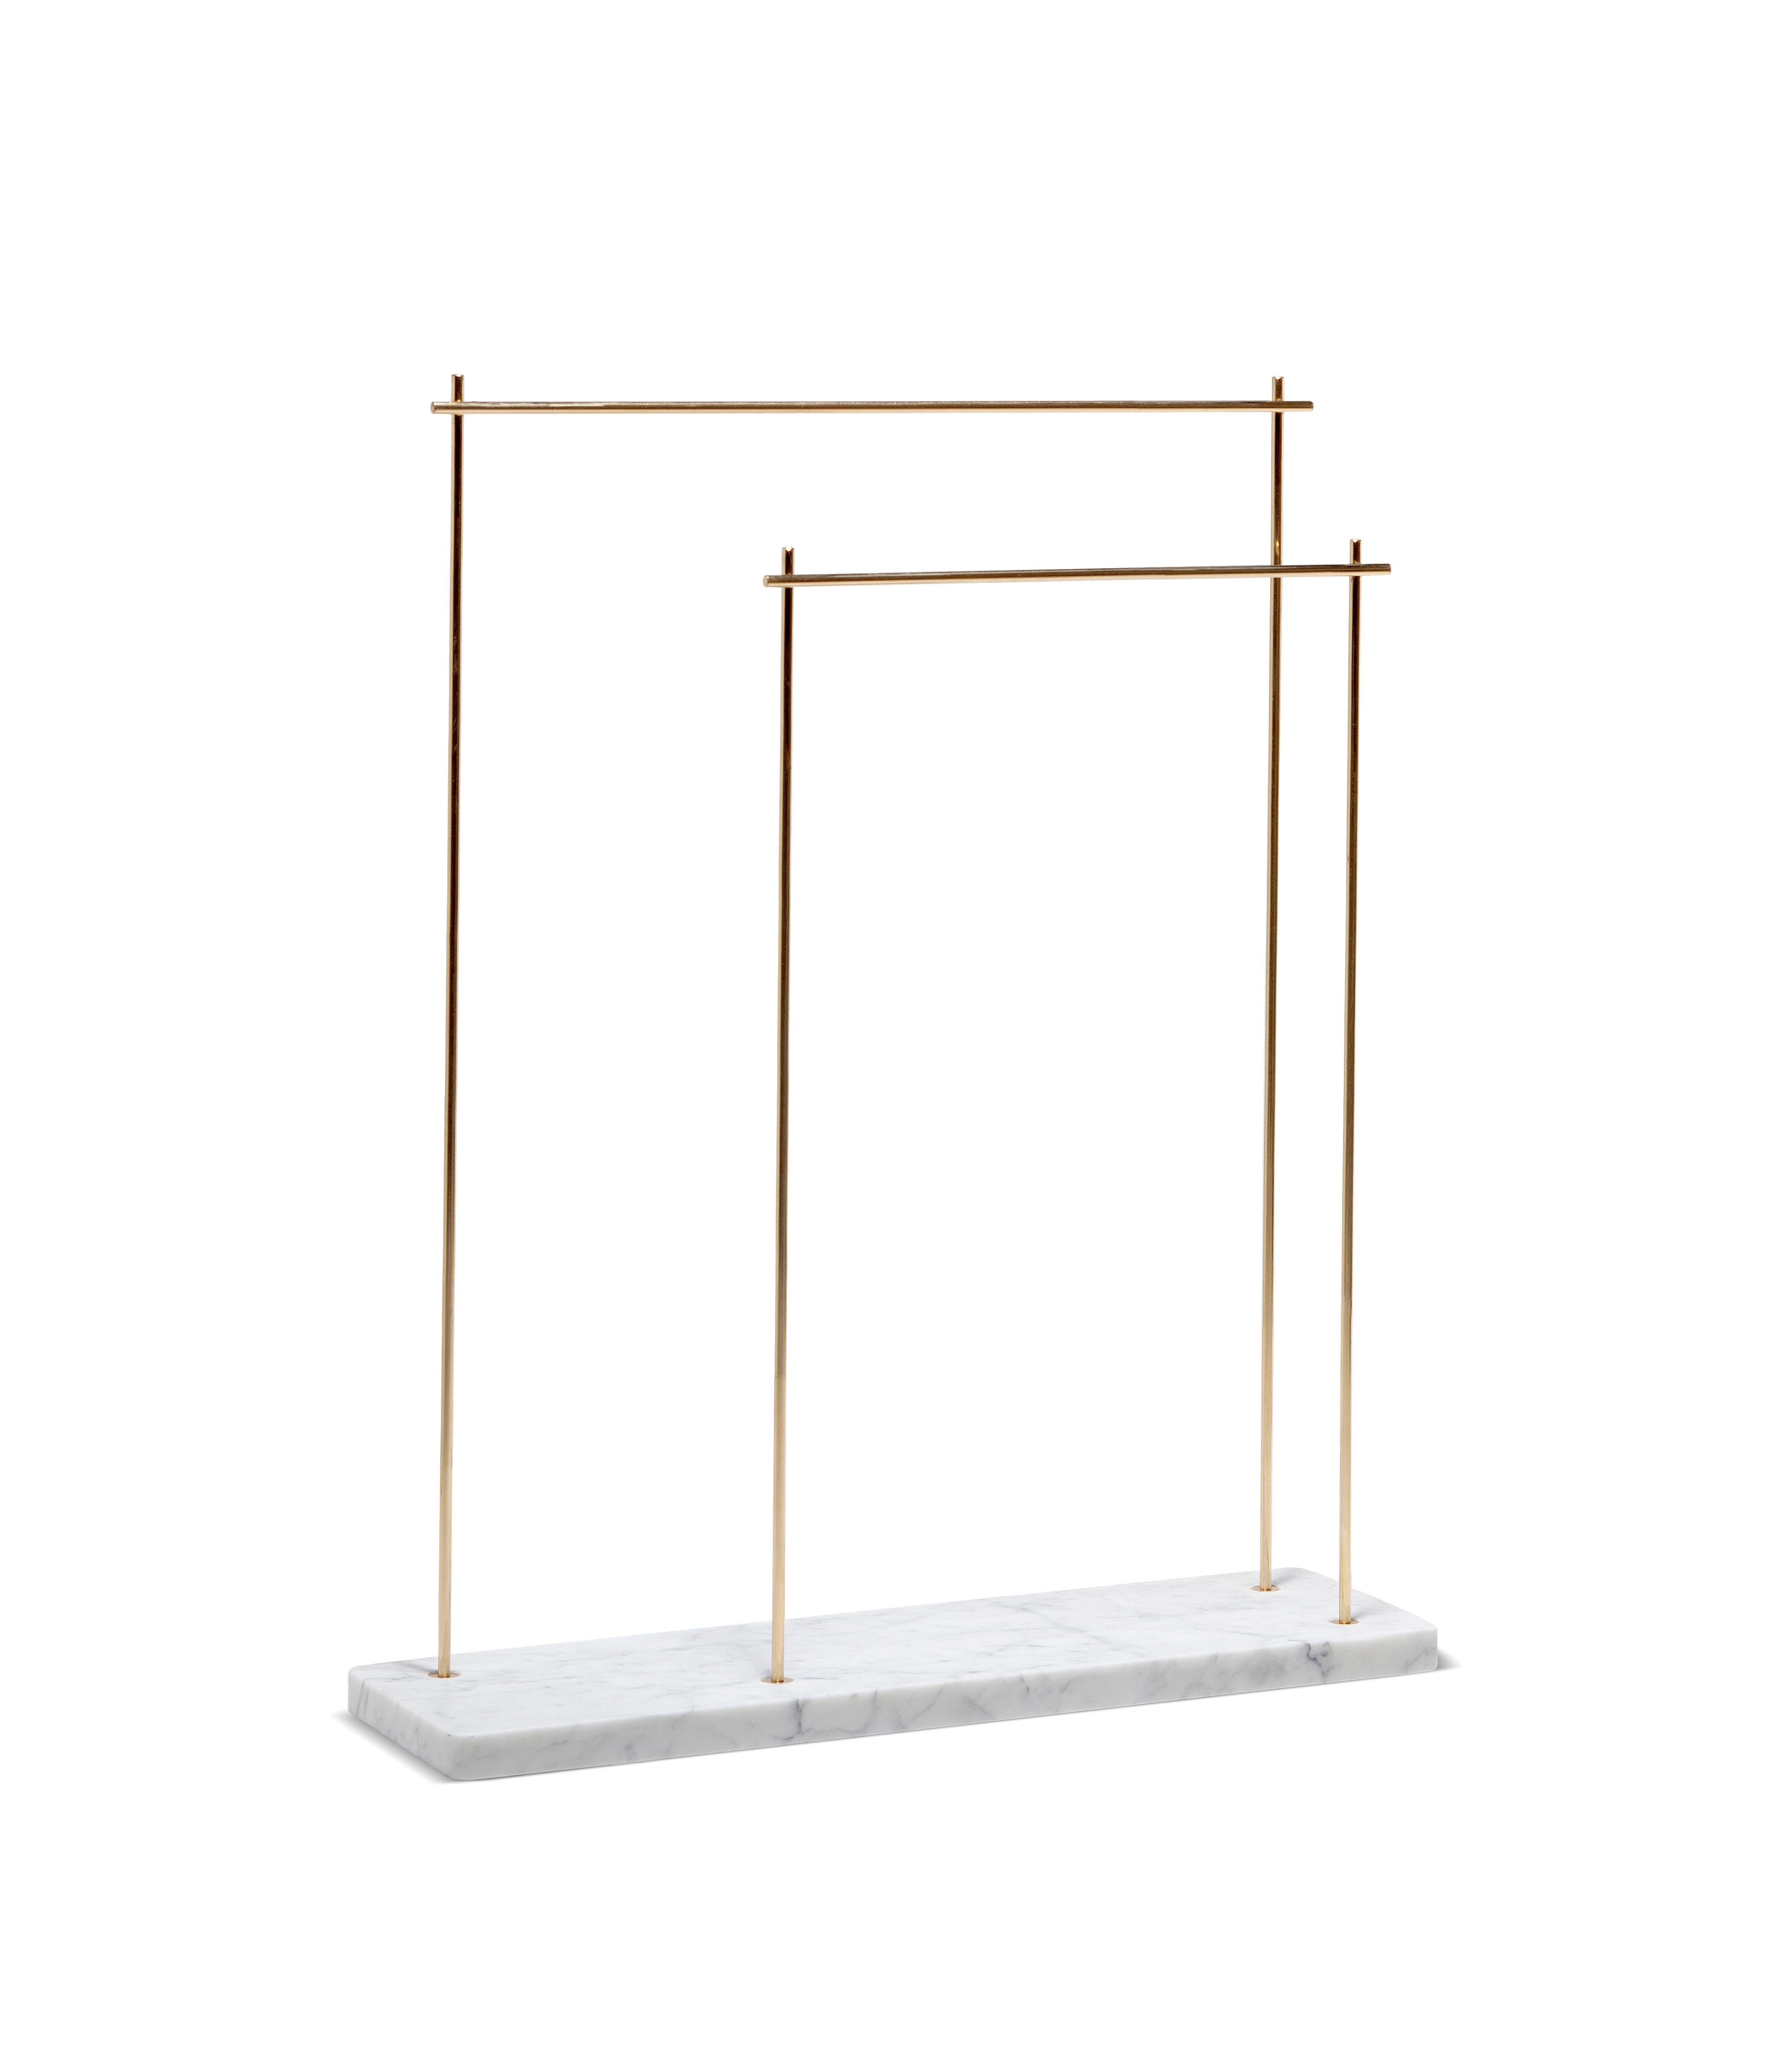 Rack towel holder by Joseph Vila Capdevila
Material: Carrara marble, brass
Dimensions: 70 x 84.5 x 20 cm
Weight: 13.2 kg

Aparentment is a space for creation and innovation, experimenting with materials with the goal to develop robust, lasting and